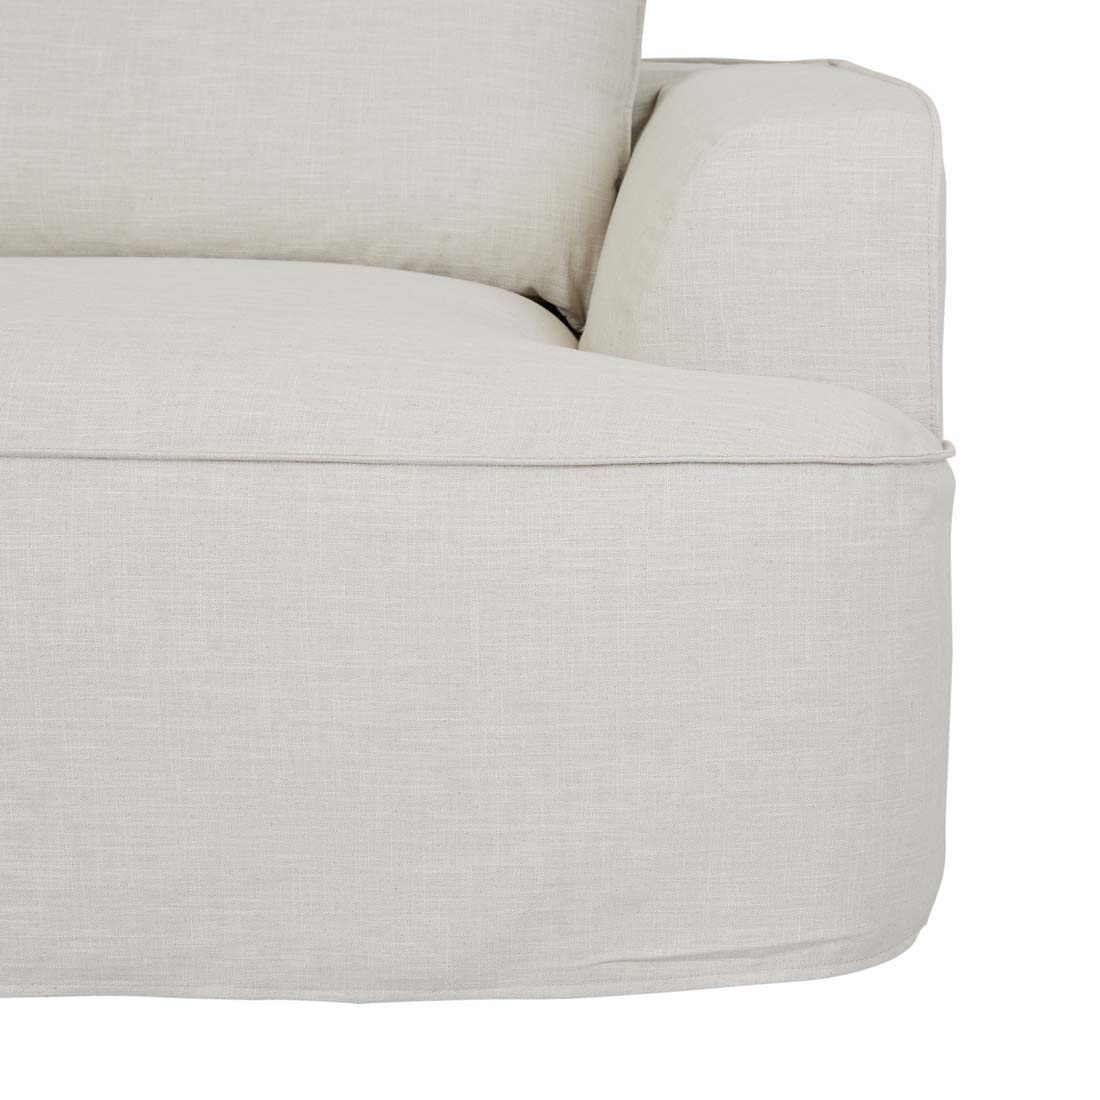 Airlie Slouch 1 Seater Right Arm Sofa image 4